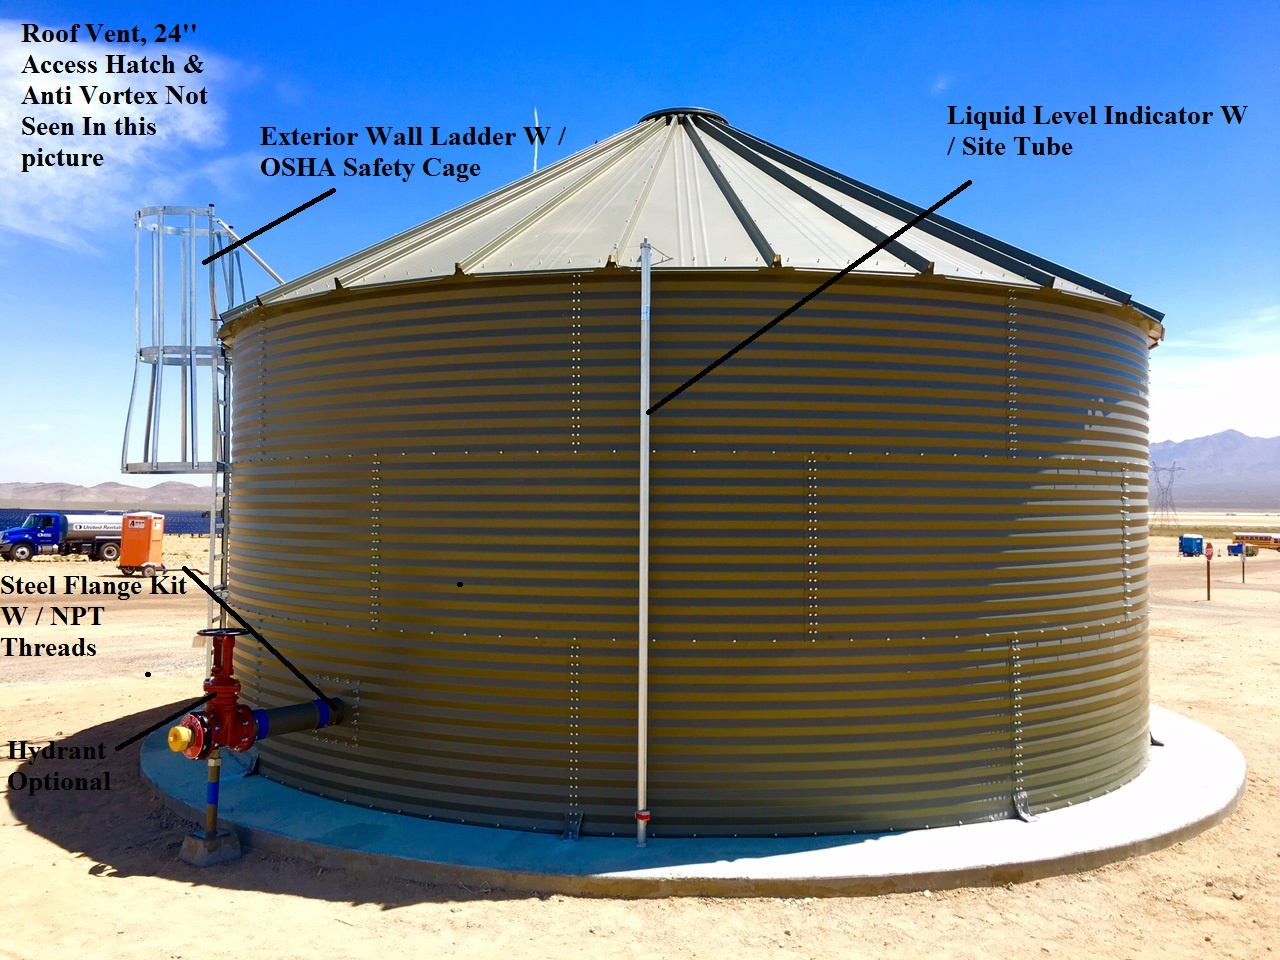 RainFlo Corrugated Steel NFPA Fire Protection Tank Systems